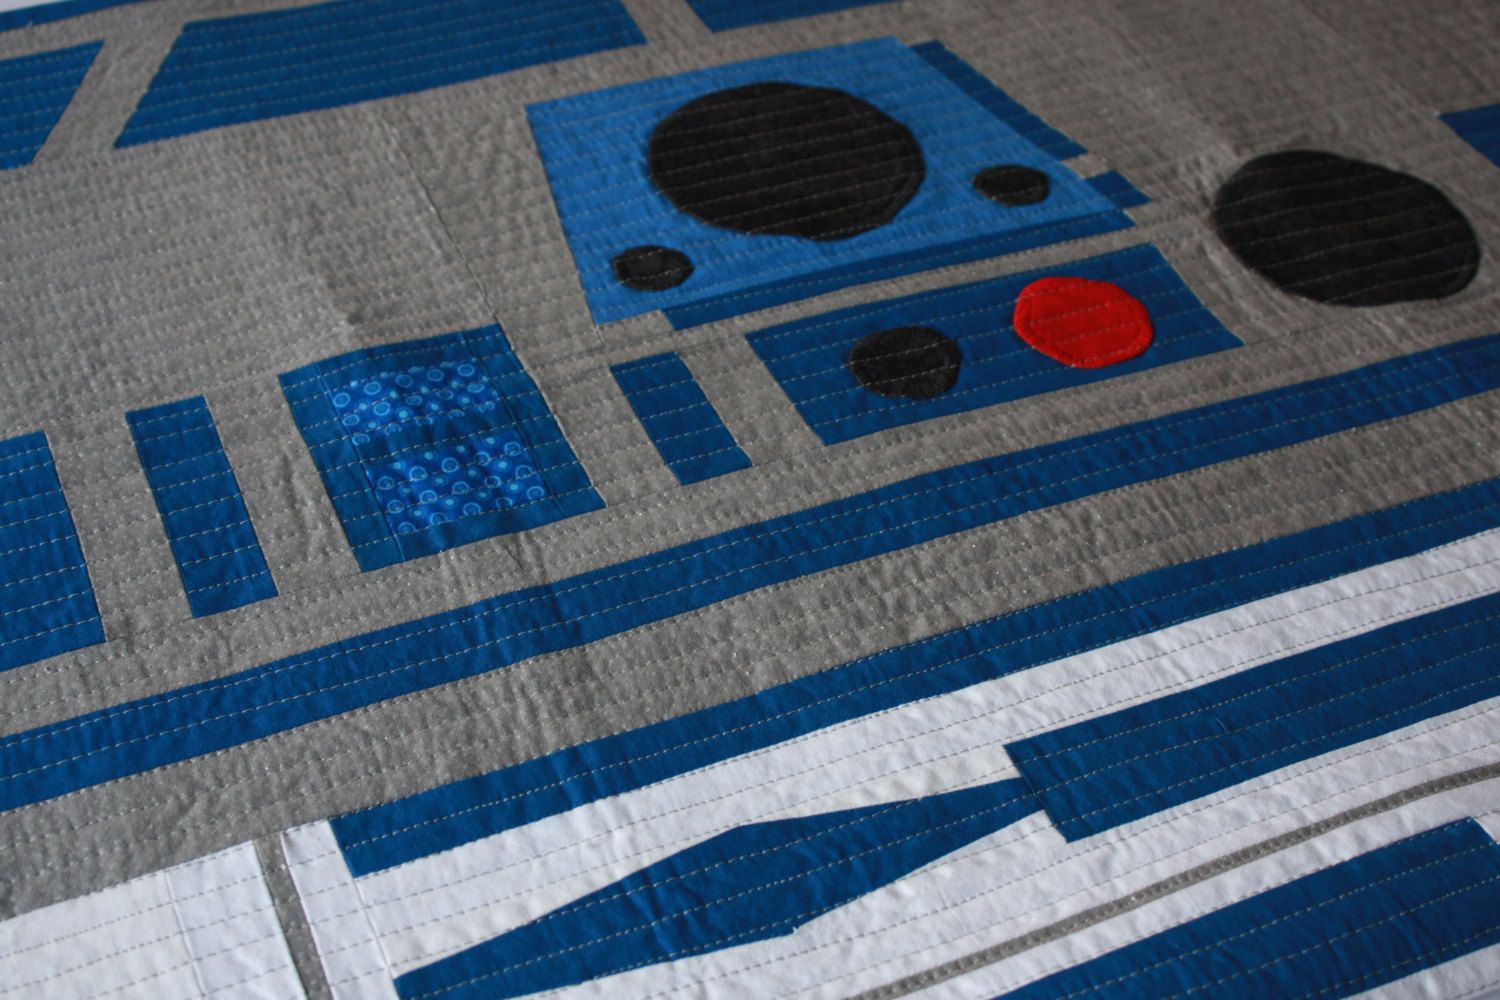 Star Wars baby quilt featuring R2D2 by Bed Hog Shop